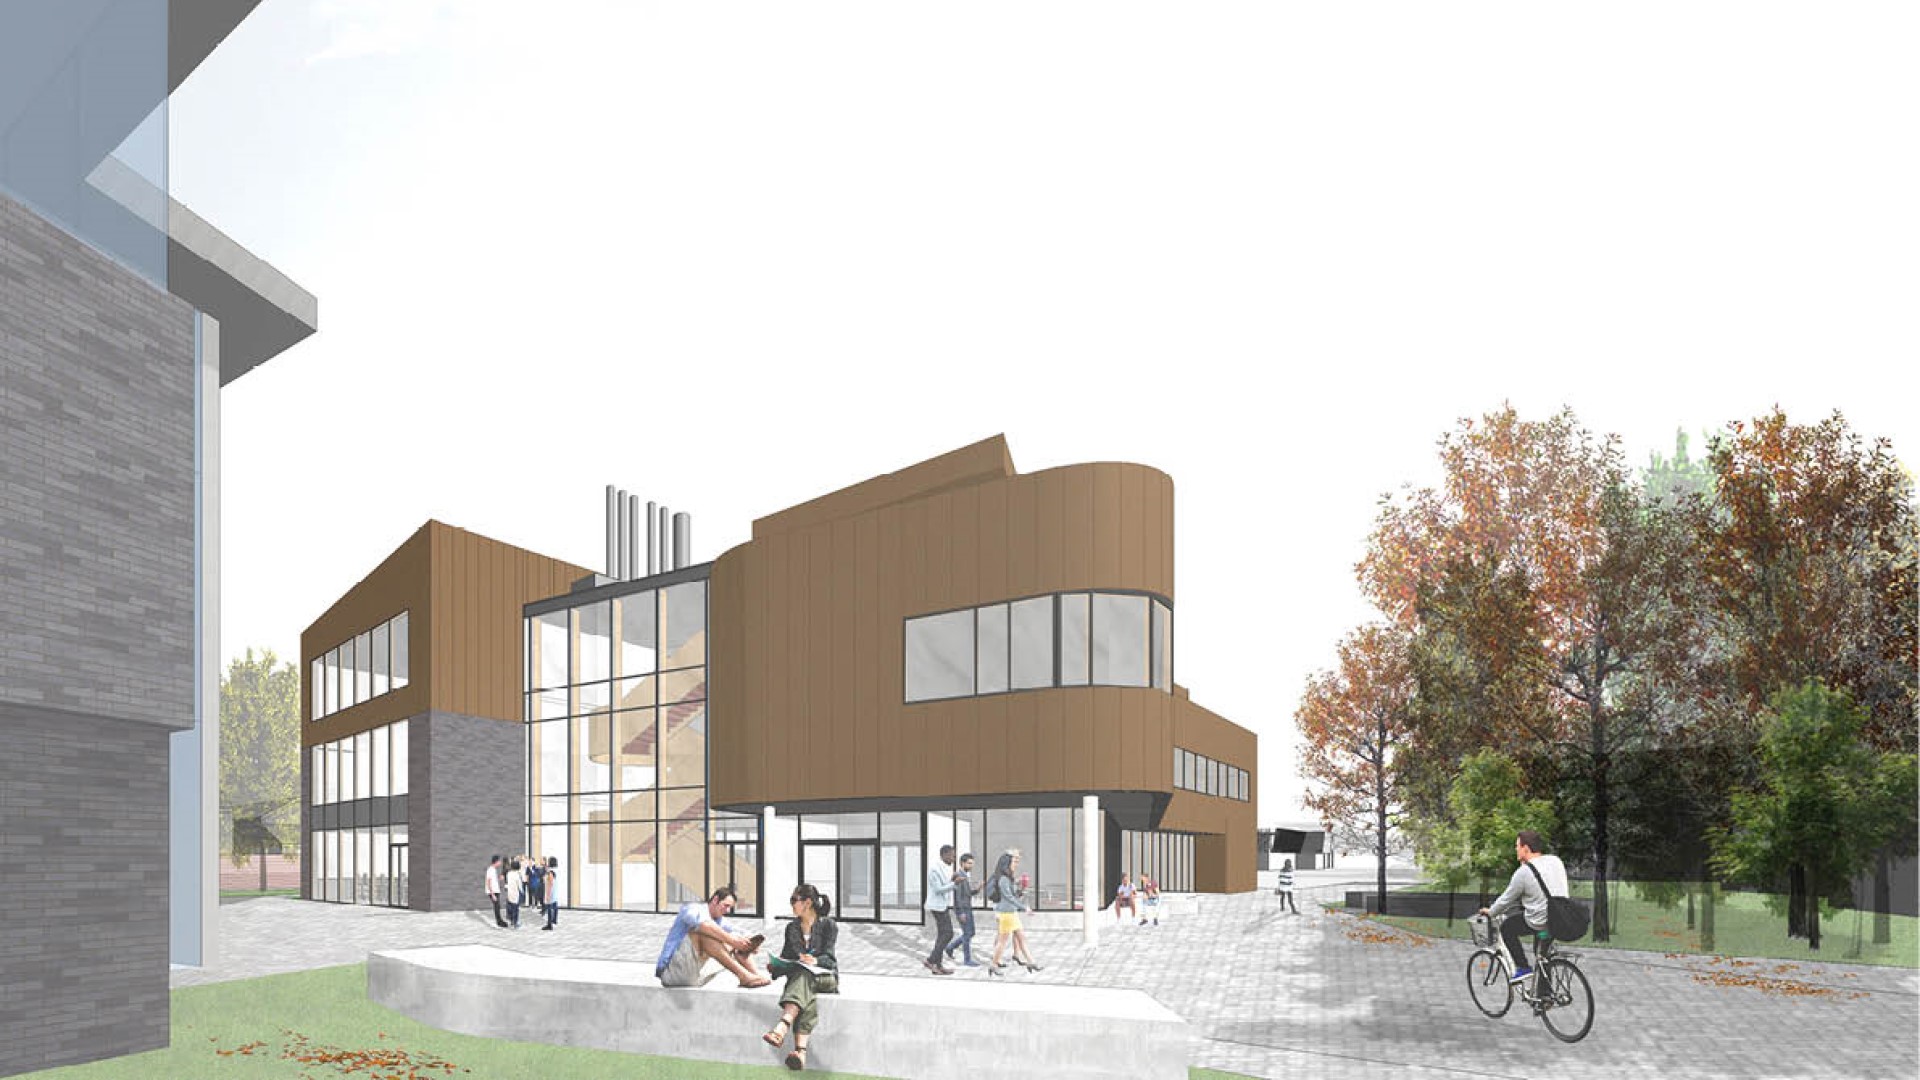 An artist's impression of the new Life Sciences facility at Edge Hill University.